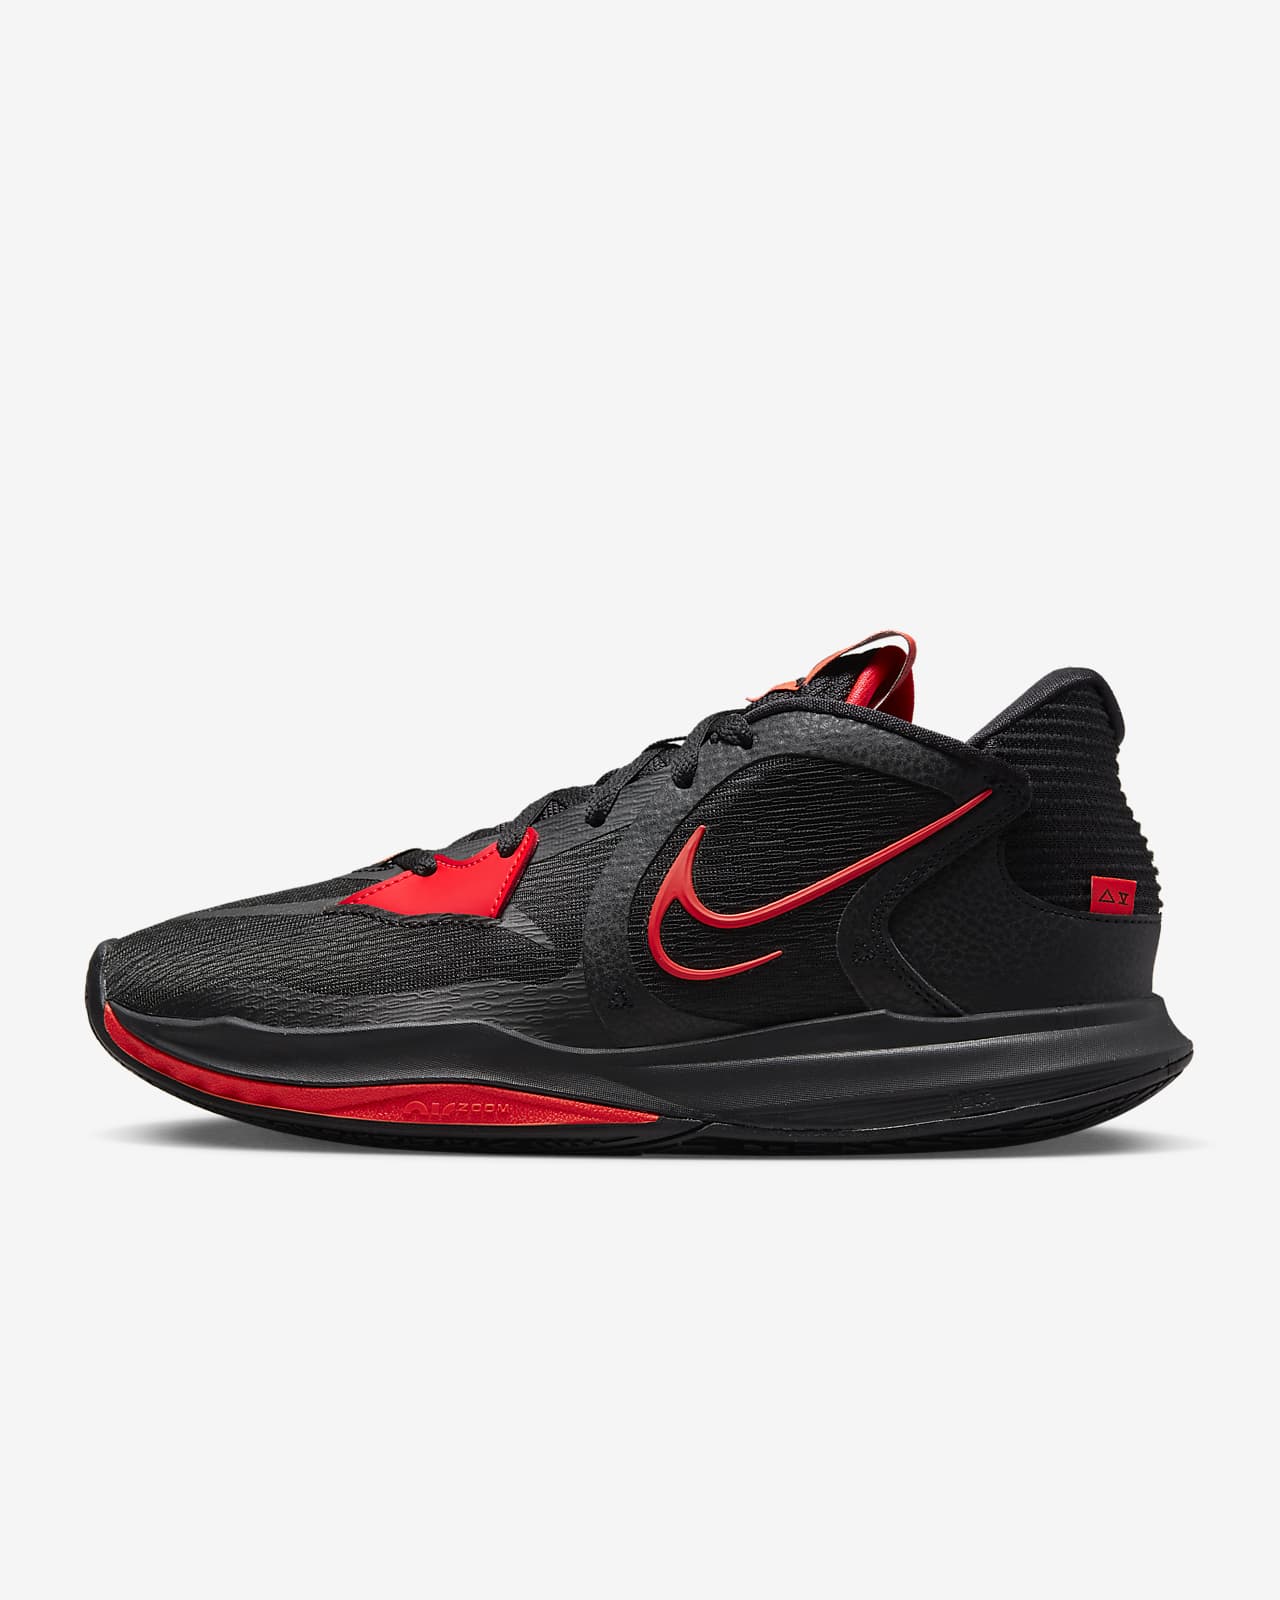 Kyrie Low 5 Ep Basketball Shoes. Nike Ph